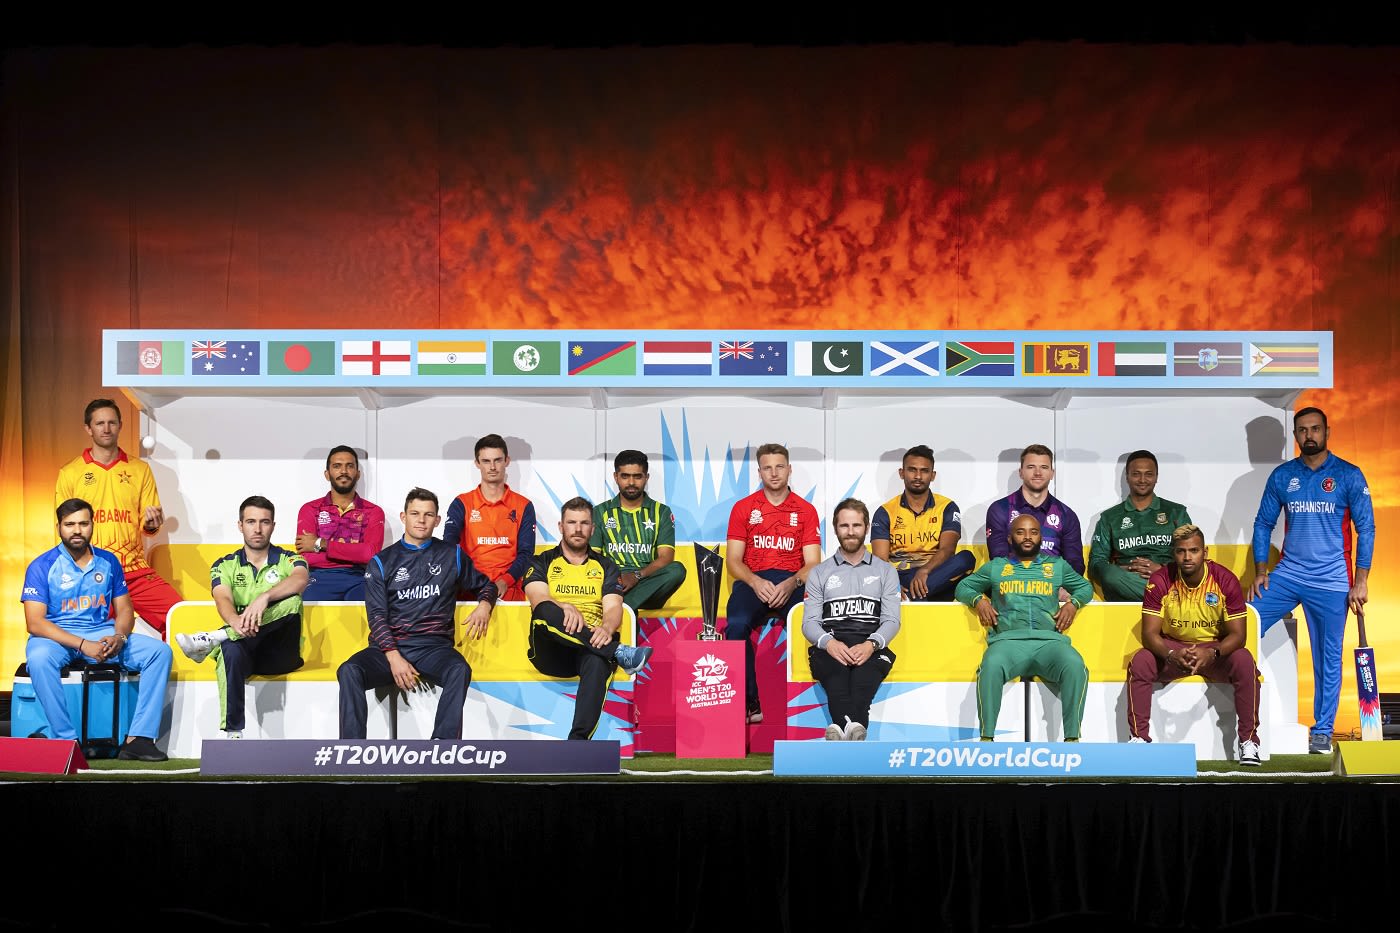 Team captains pose for a photo ahead of the Men's T20 World Cup